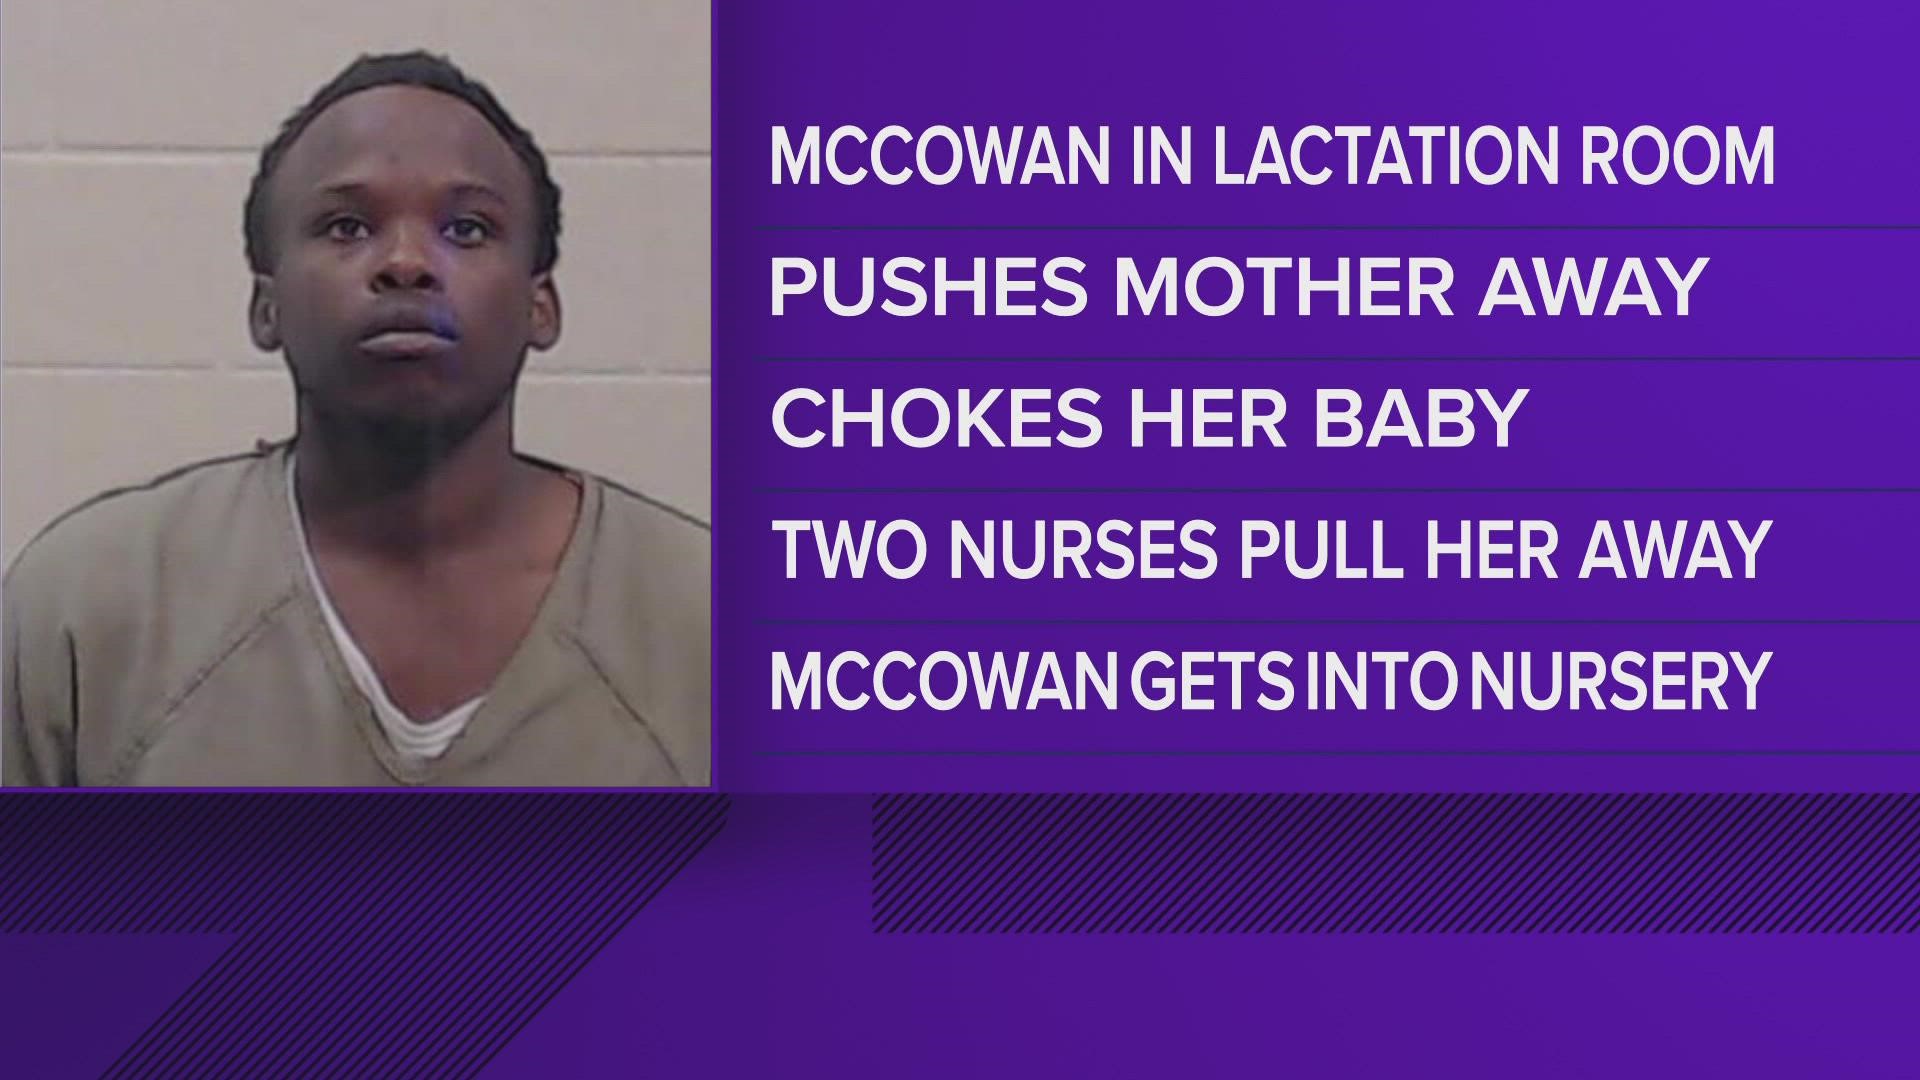 Marcus McCowan, Jr. also resisted arrest and tried to take an officer's gun.